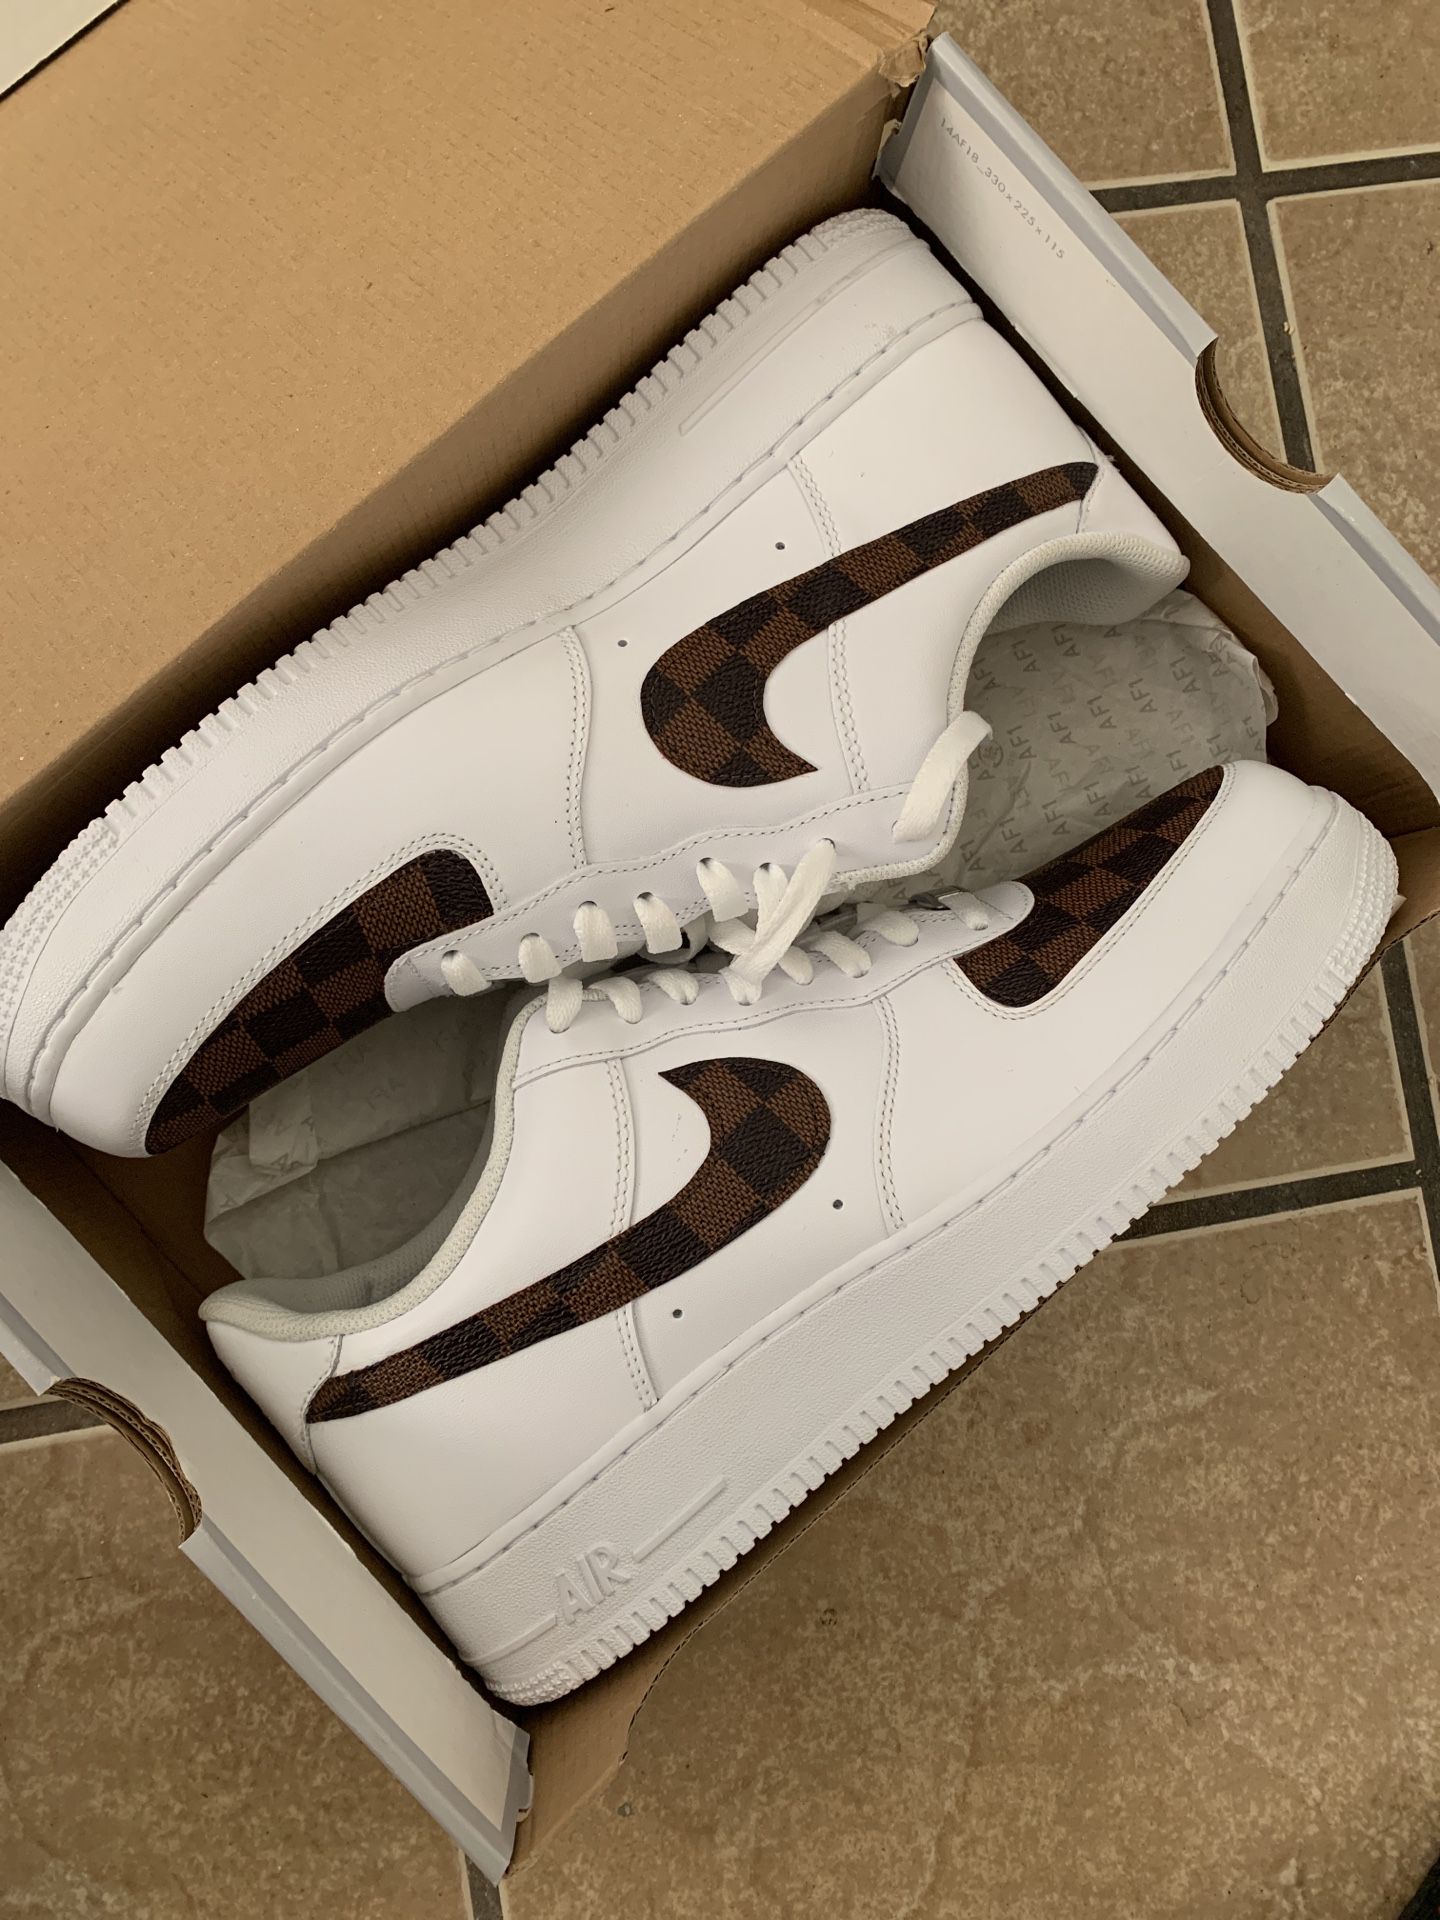 Air Force 1 LV Brown | YCOHOTSALESBUSINESS